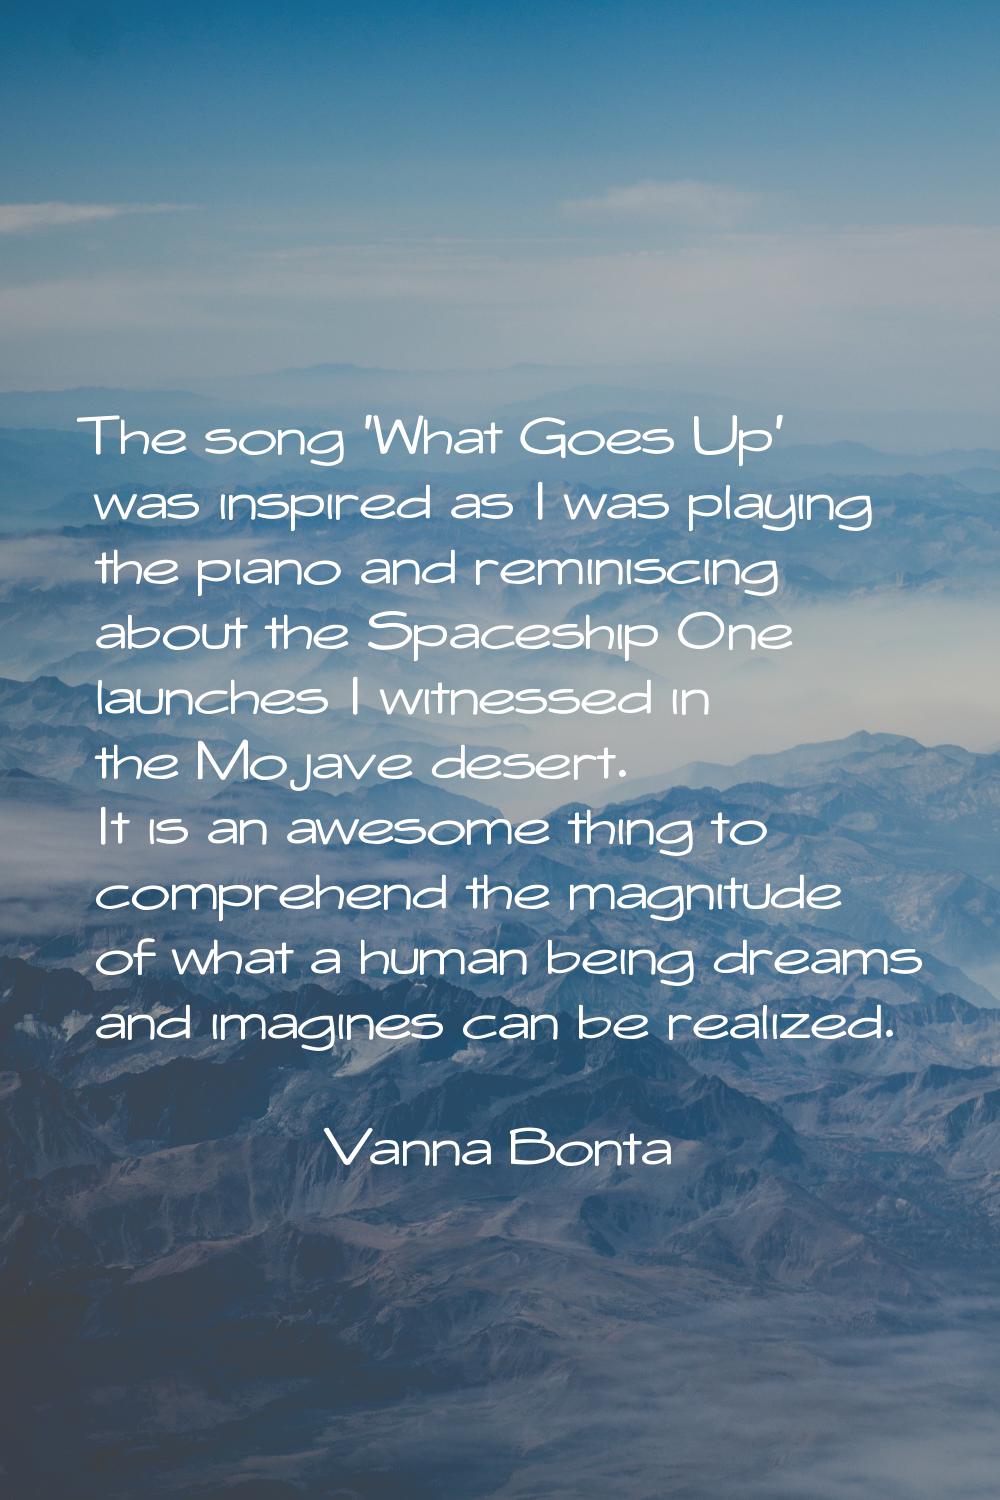 The song 'What Goes Up' was inspired as I was playing the piano and reminiscing about the Spaceship